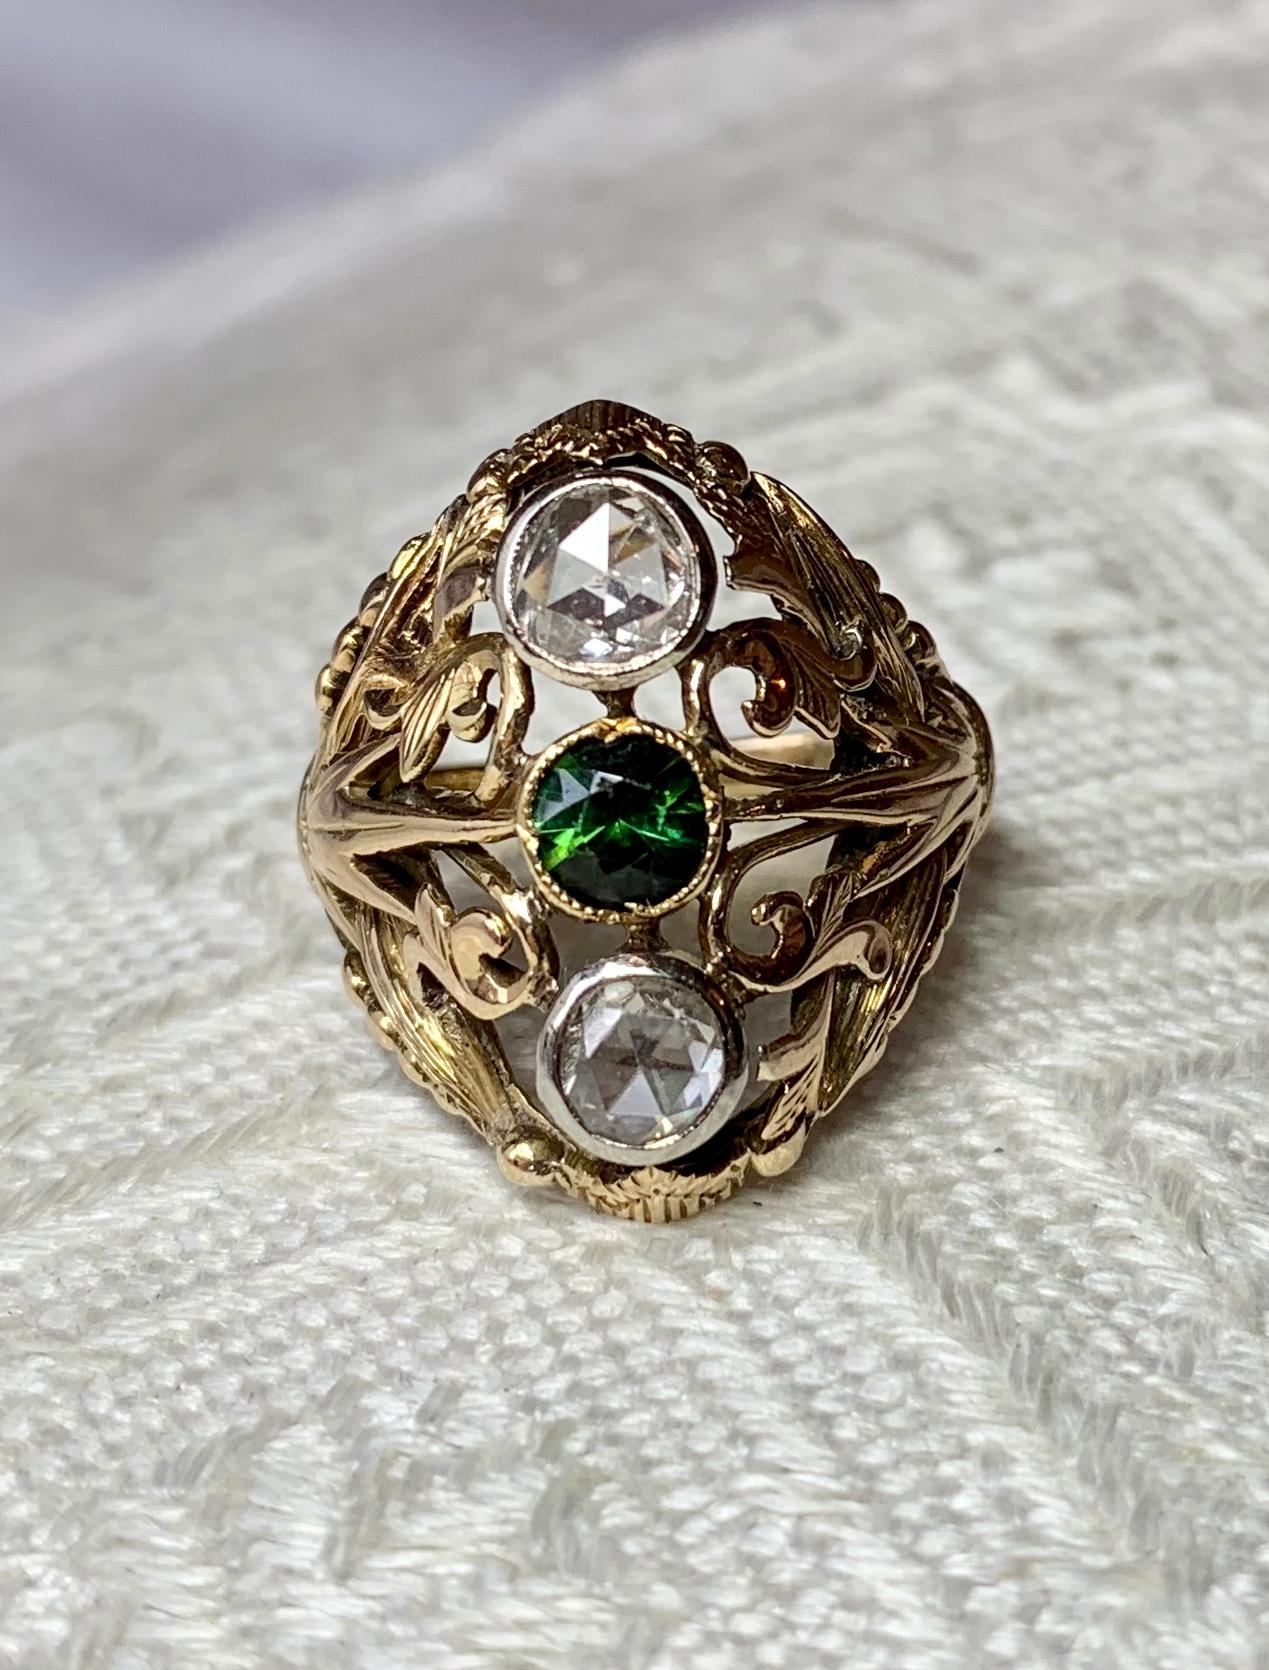 A magnificent original Art Nouveau Ring with a central Fine Green Tourmaline and two stunning Rose Cut Diamonds set in an open work highly detailed setting of great beauty in 14 Karat Gold.  A very unusual Art Nouveau - Belle Epoque jewel with a